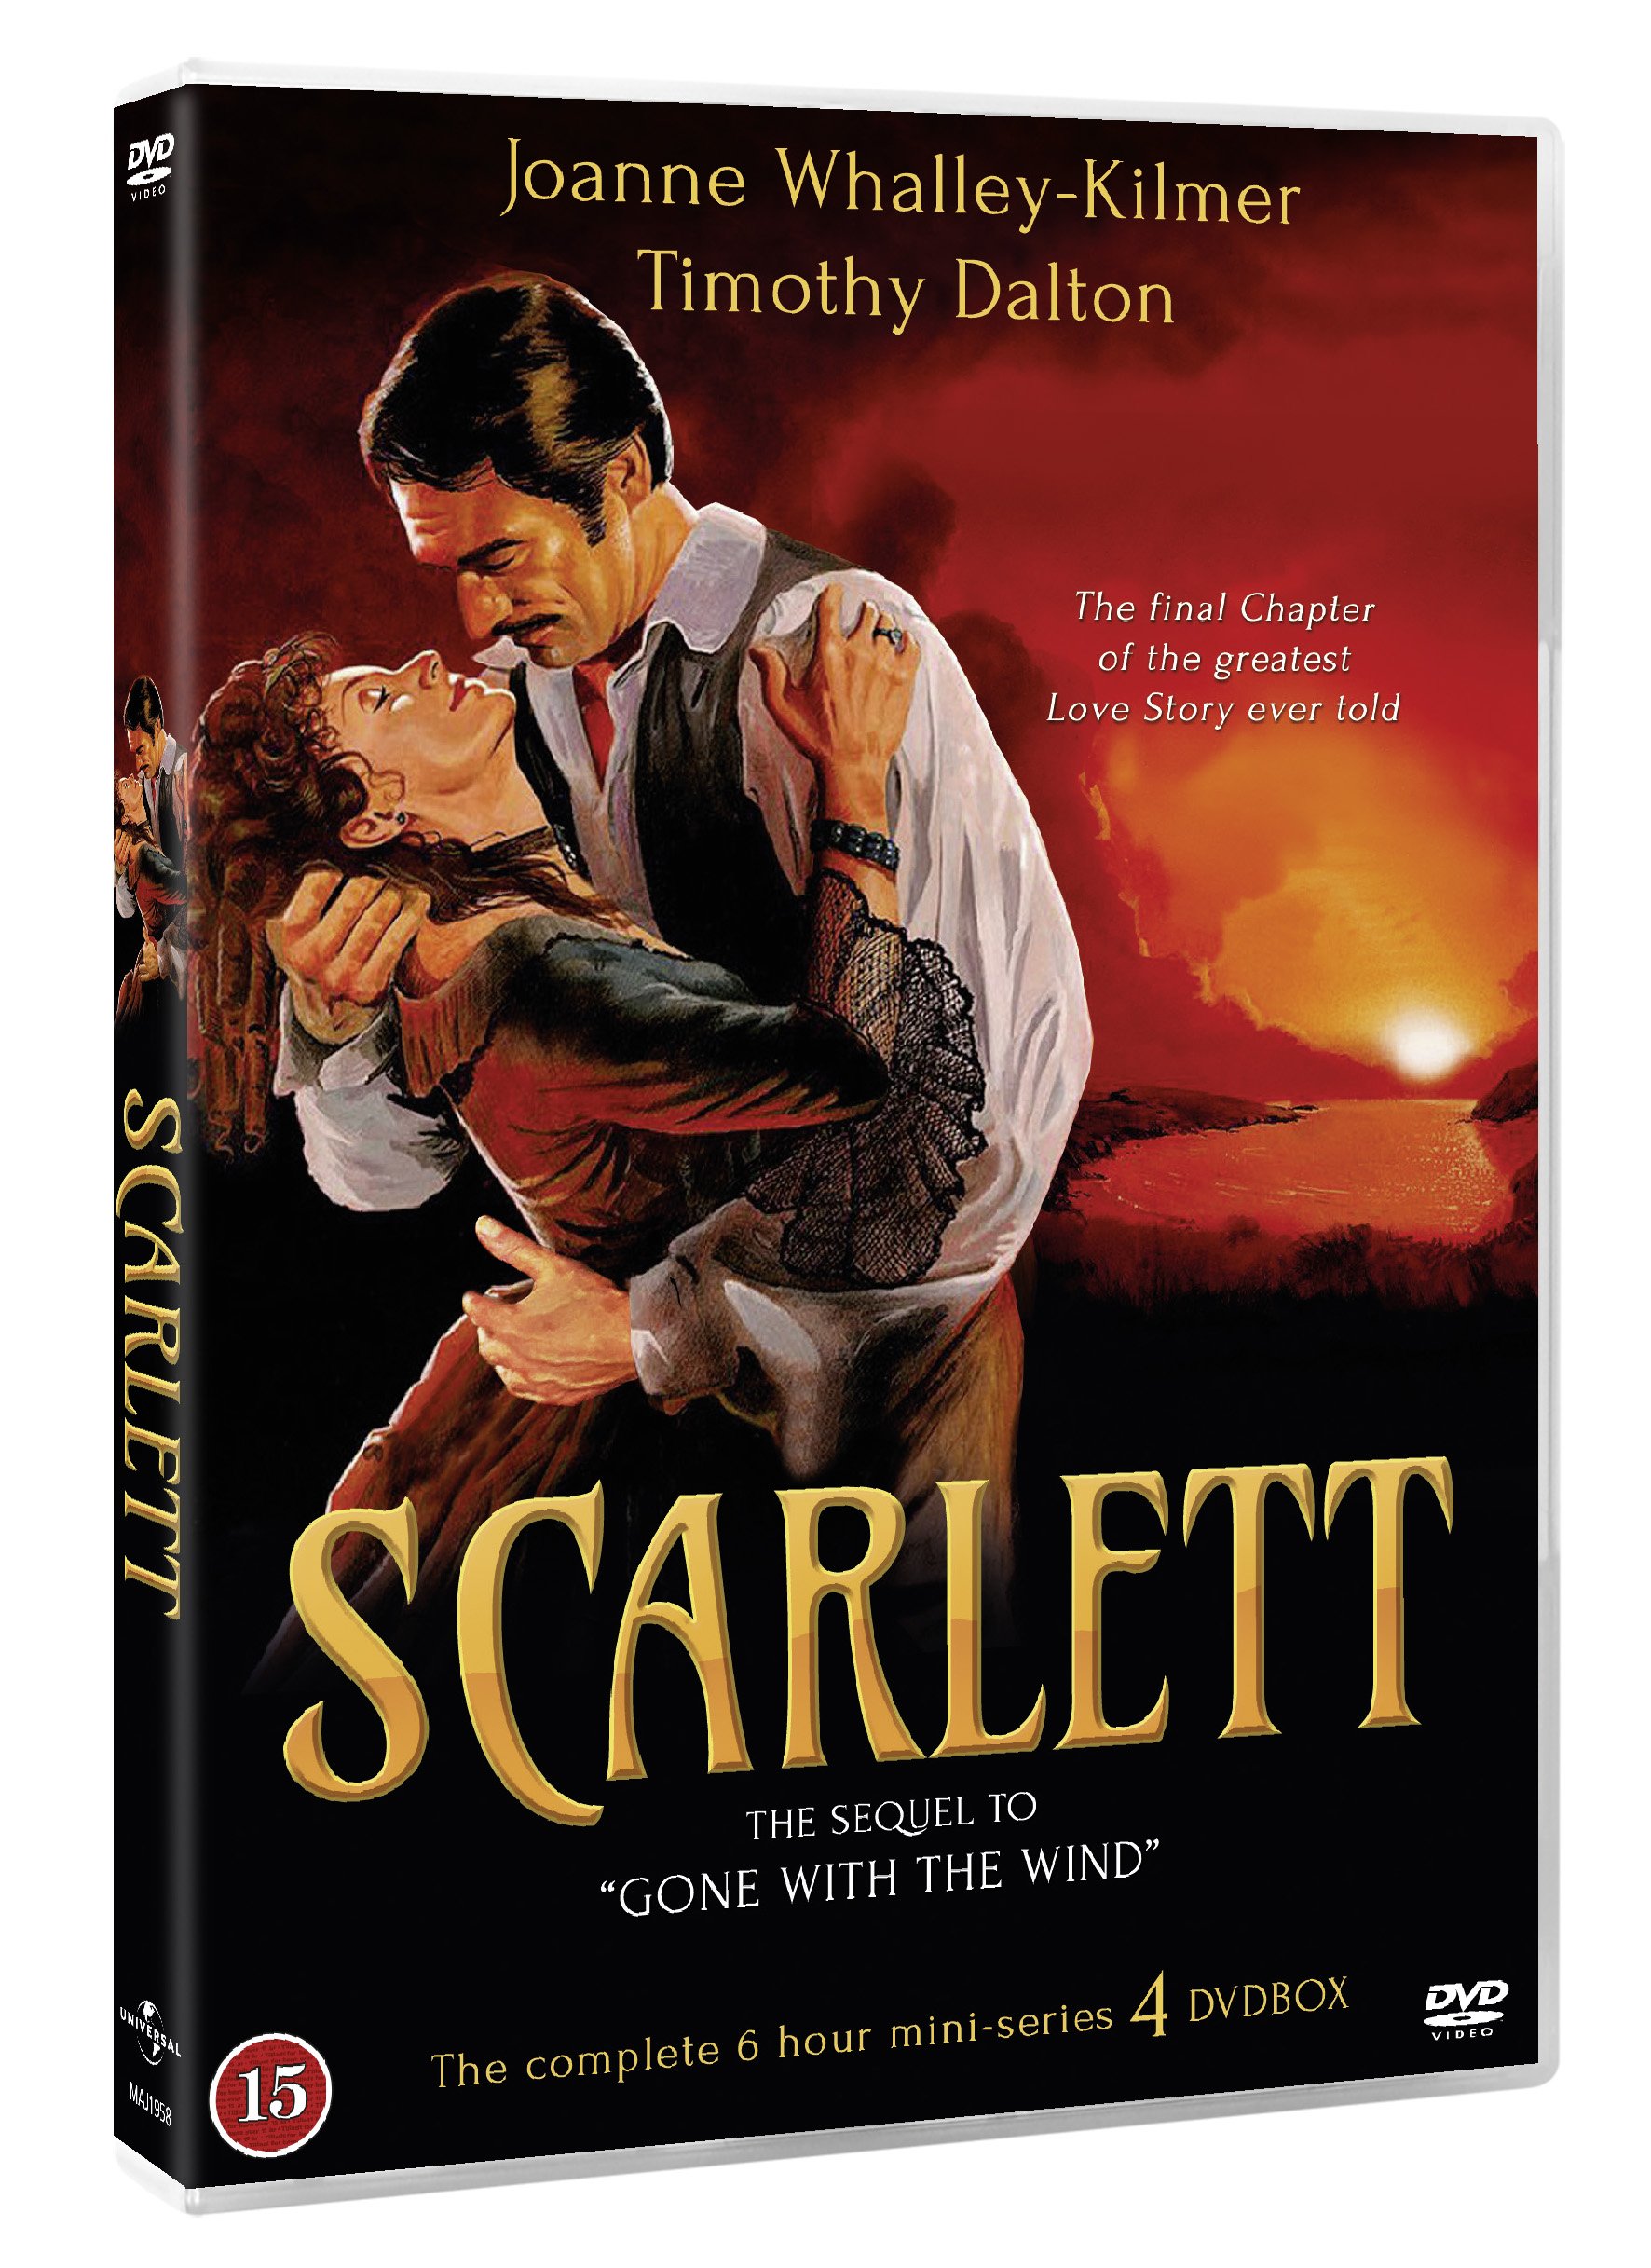 Scarlett - 4 DVD box Mini series - Sequel to Gone with the wind - 30 Years anniversary edition - Filmer og TV-serier